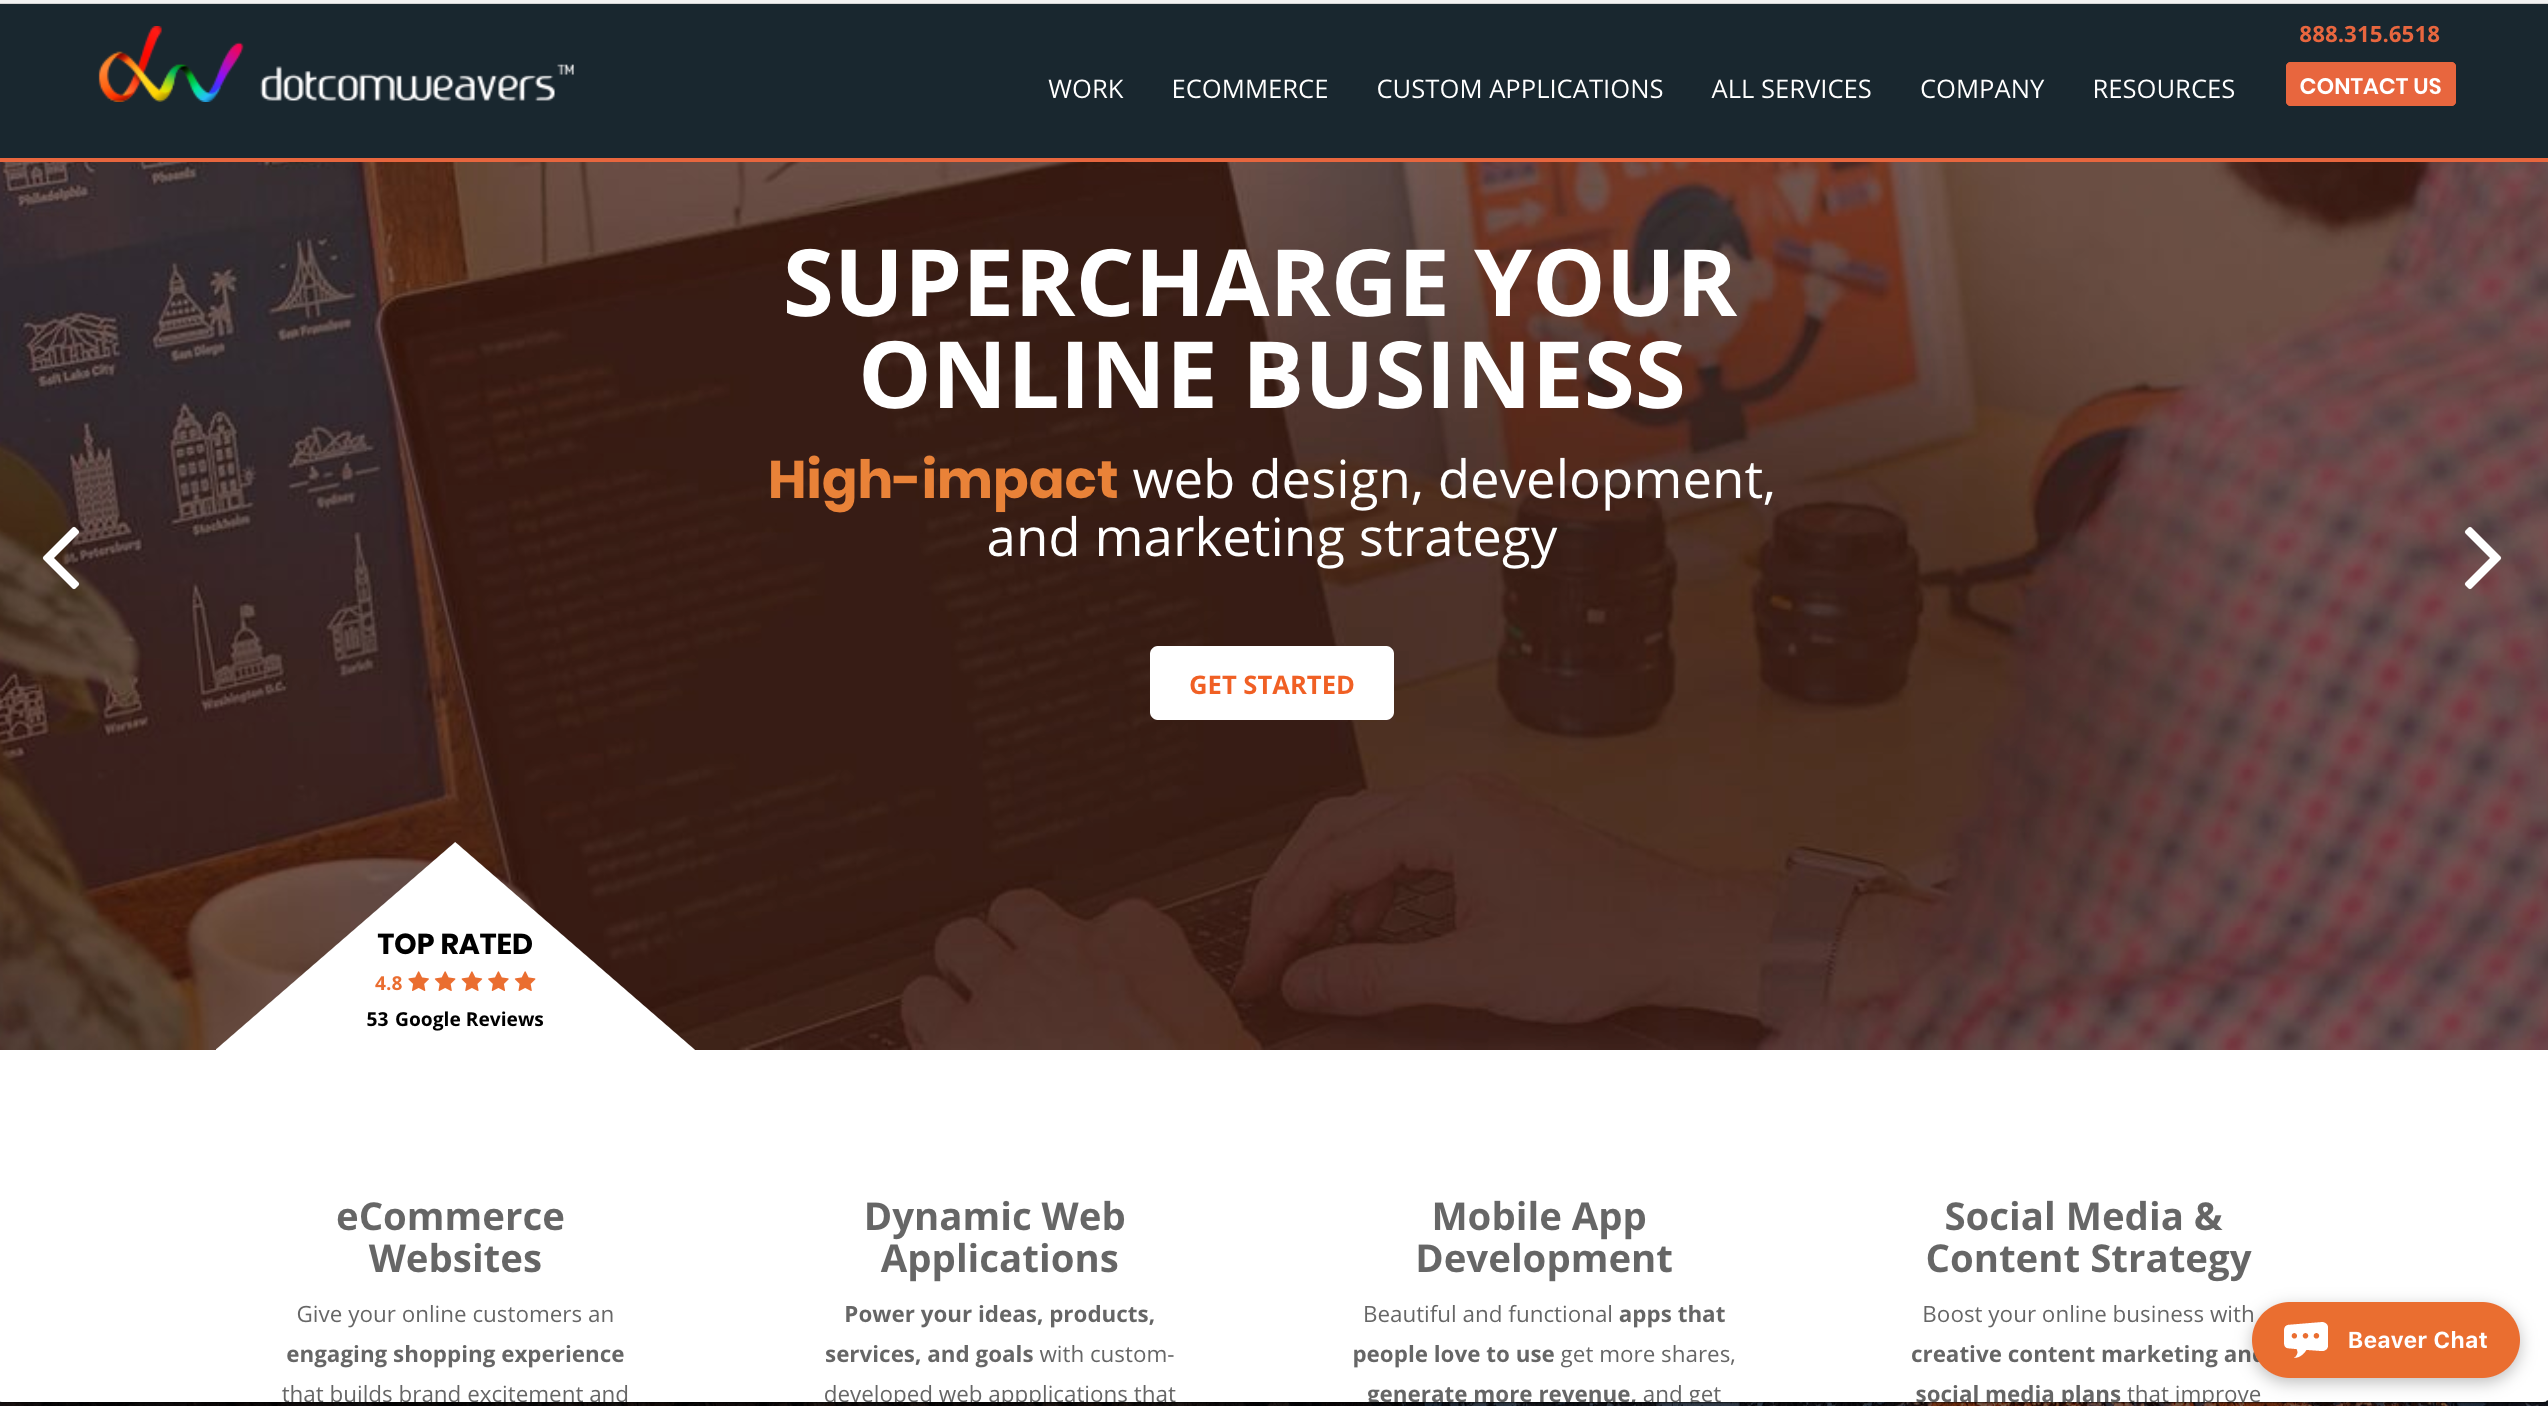 Home page of #5 Best New York Web Design Agency: Dotcomweavers